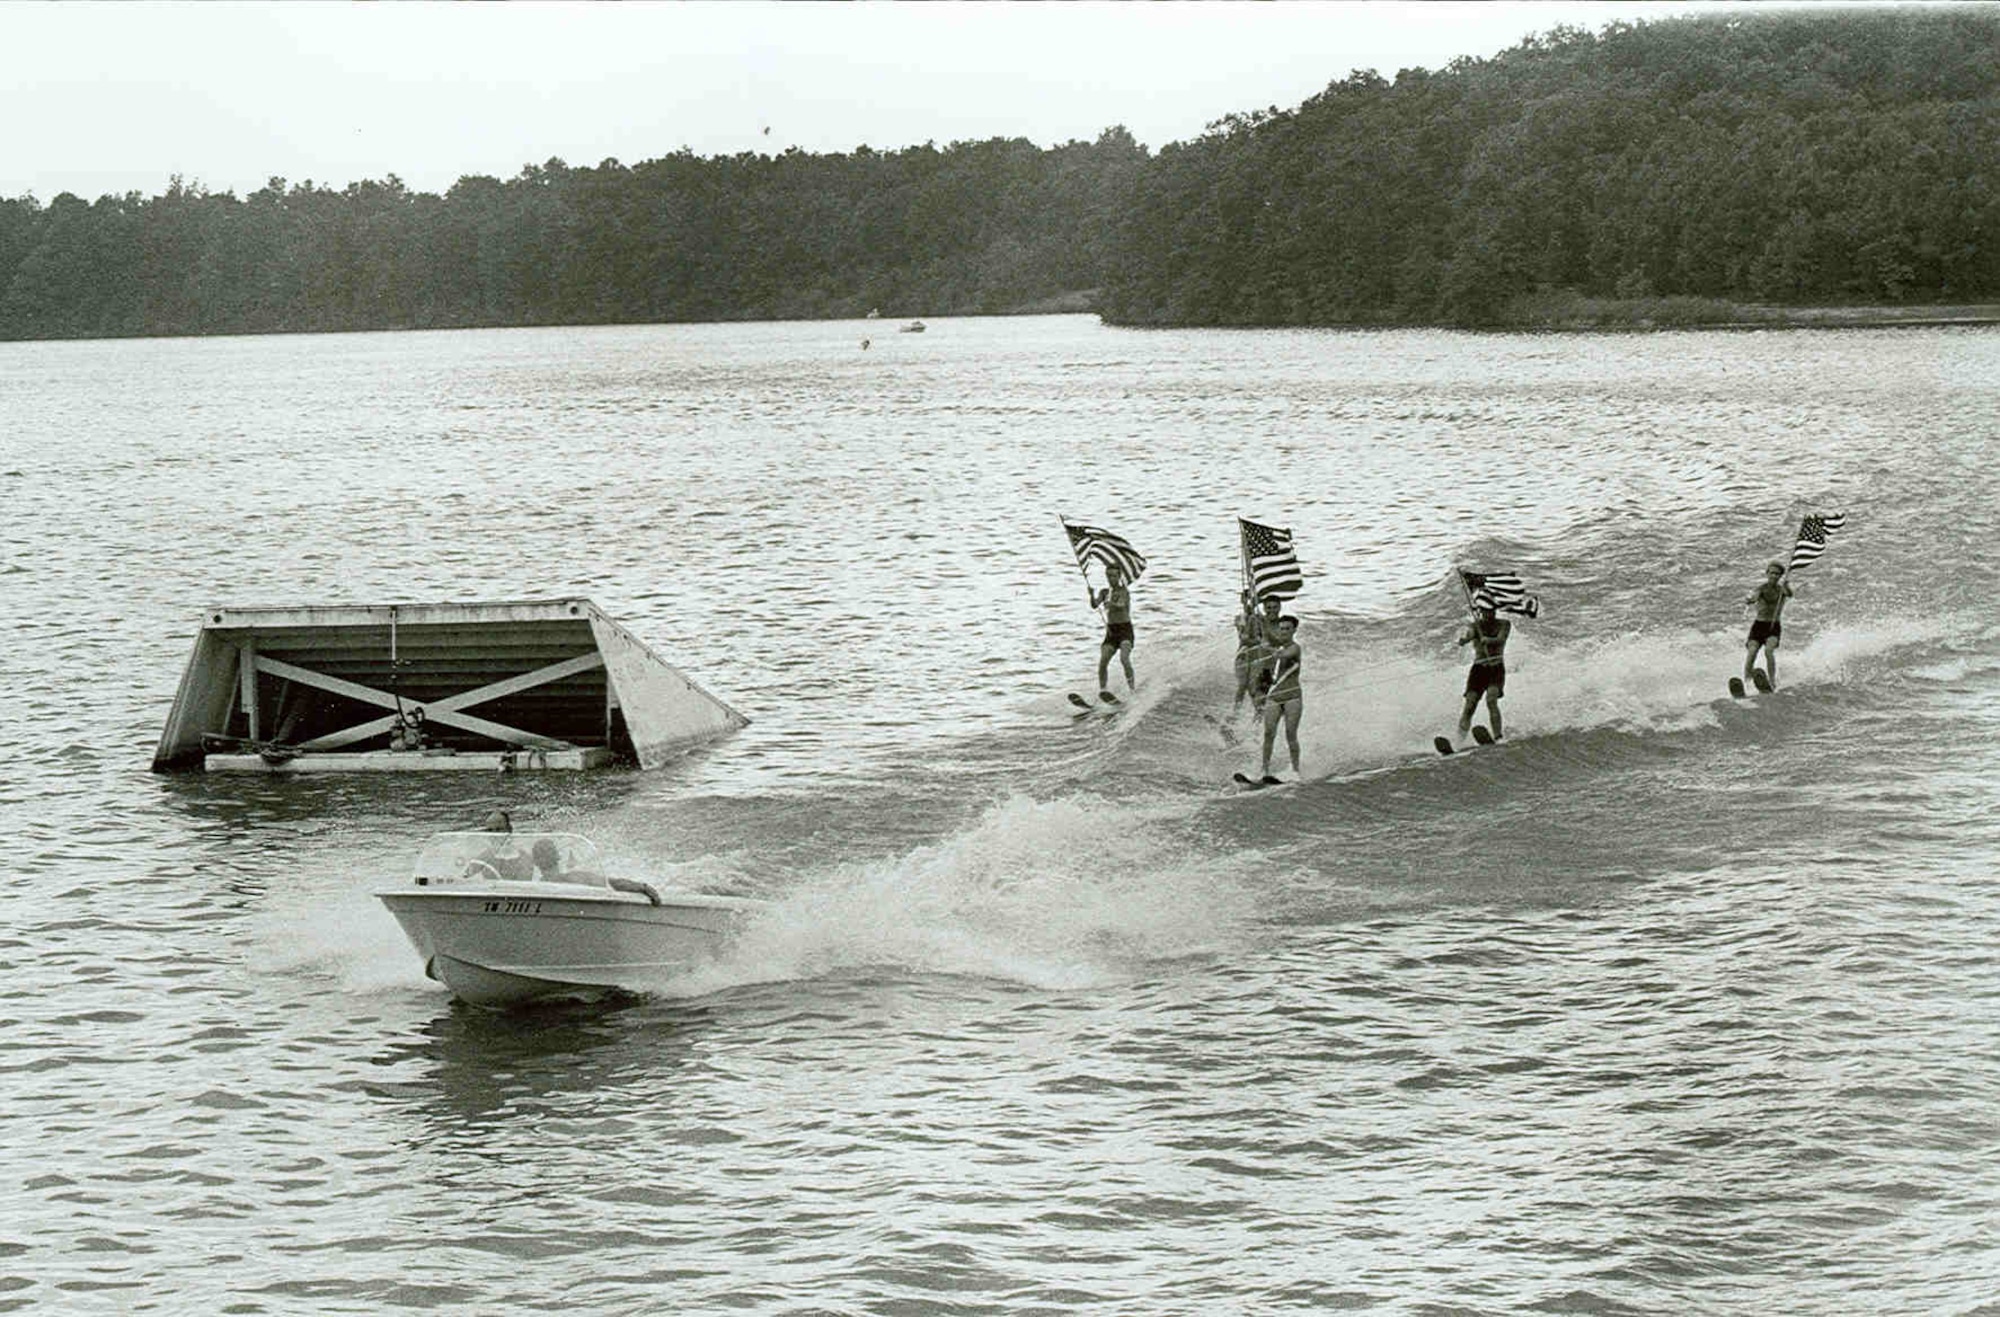 A ski club performs on Woods Reservoir during the 14th annual Arnold Engineering Development Center Family Picnic in 1968. Woods Reservoir opened for public fishing and recreation on May 30, 1953, and quickly became a destination for swimmers, skiers and fishermen. It was also used for AEDC picnics and other functions. The Elk River Dam was completed 70 years ago this month. Its construction led to the creation of Woods Reservoir, which has since supplied cooling water to the test facilities at Arnold Air Force Base, Tennessee. Arnold AFB is the headquarters of the Arnold Engineering Development Complex. (U.S. Air Force photo)